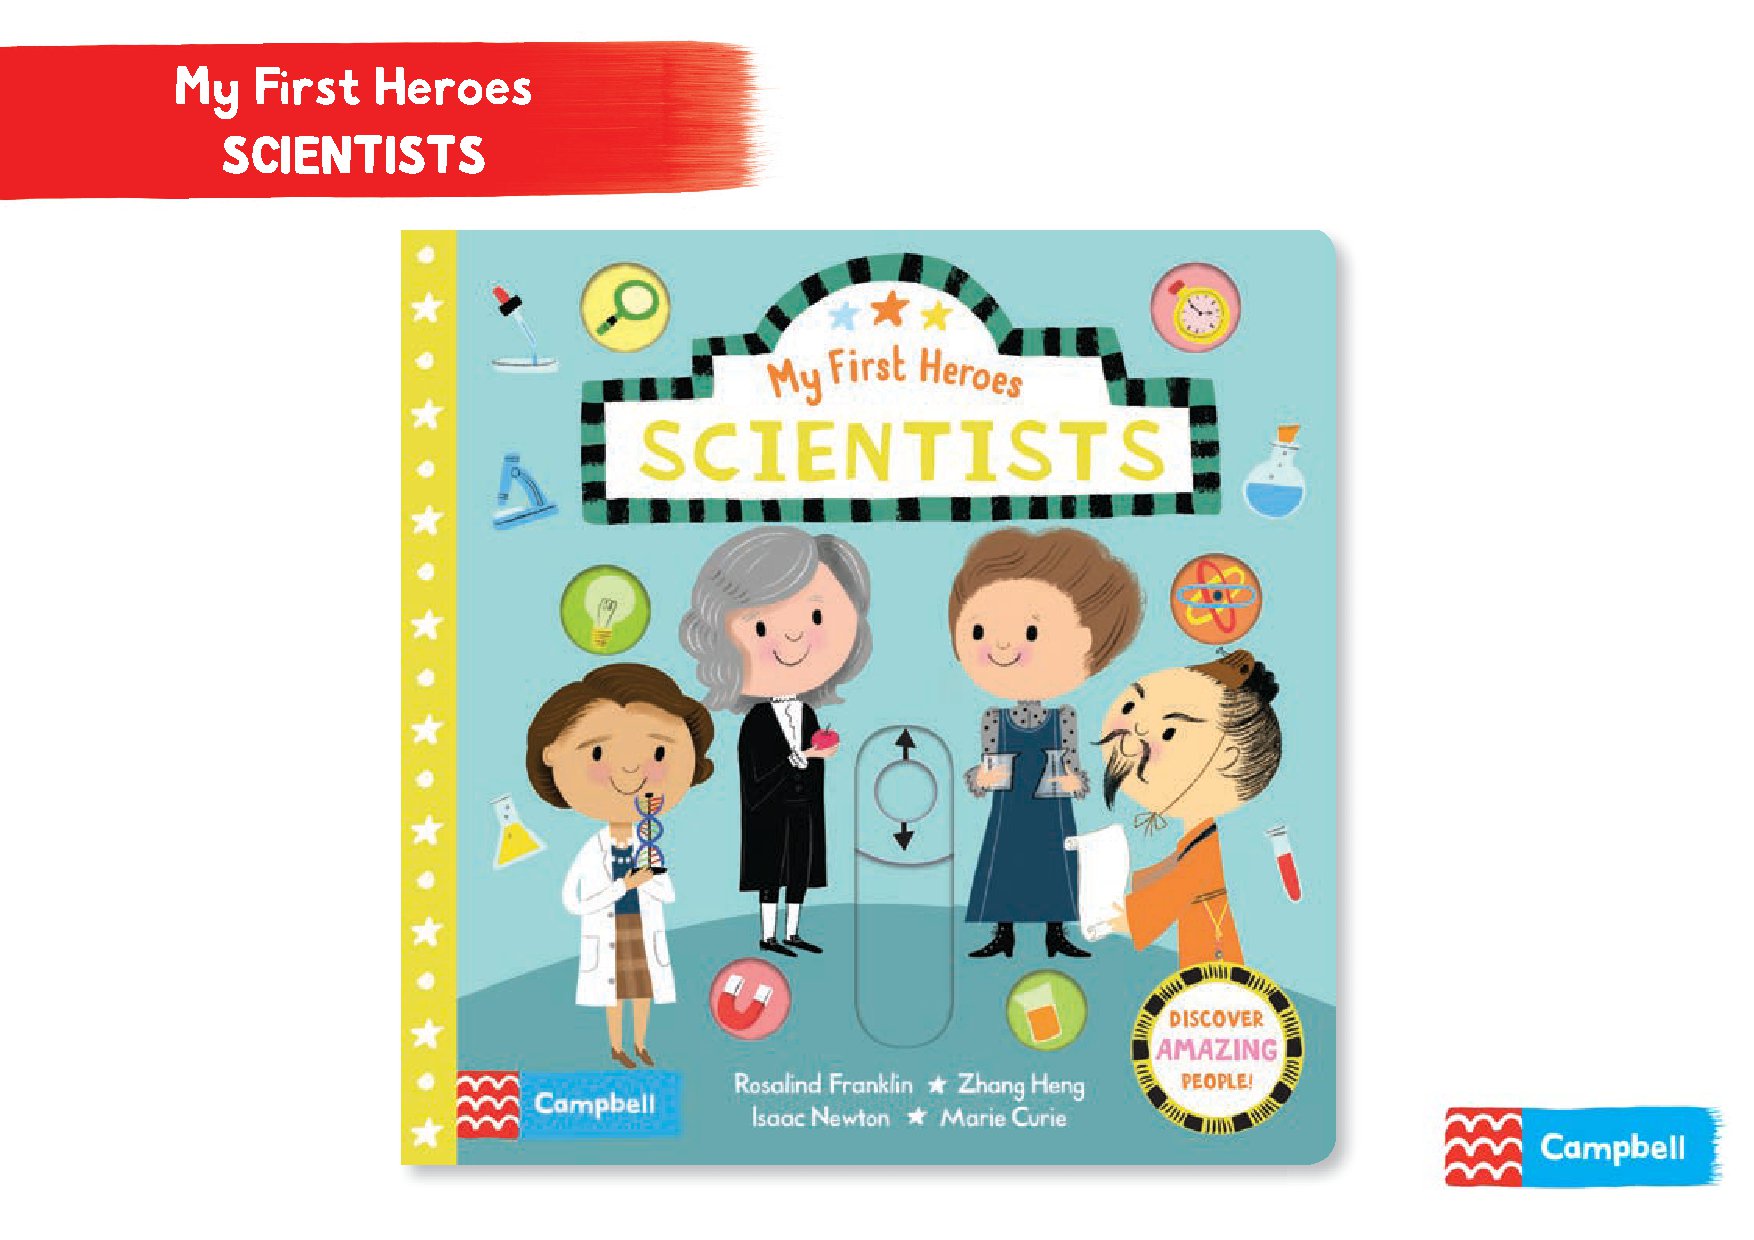 My First Heroes: Scientists